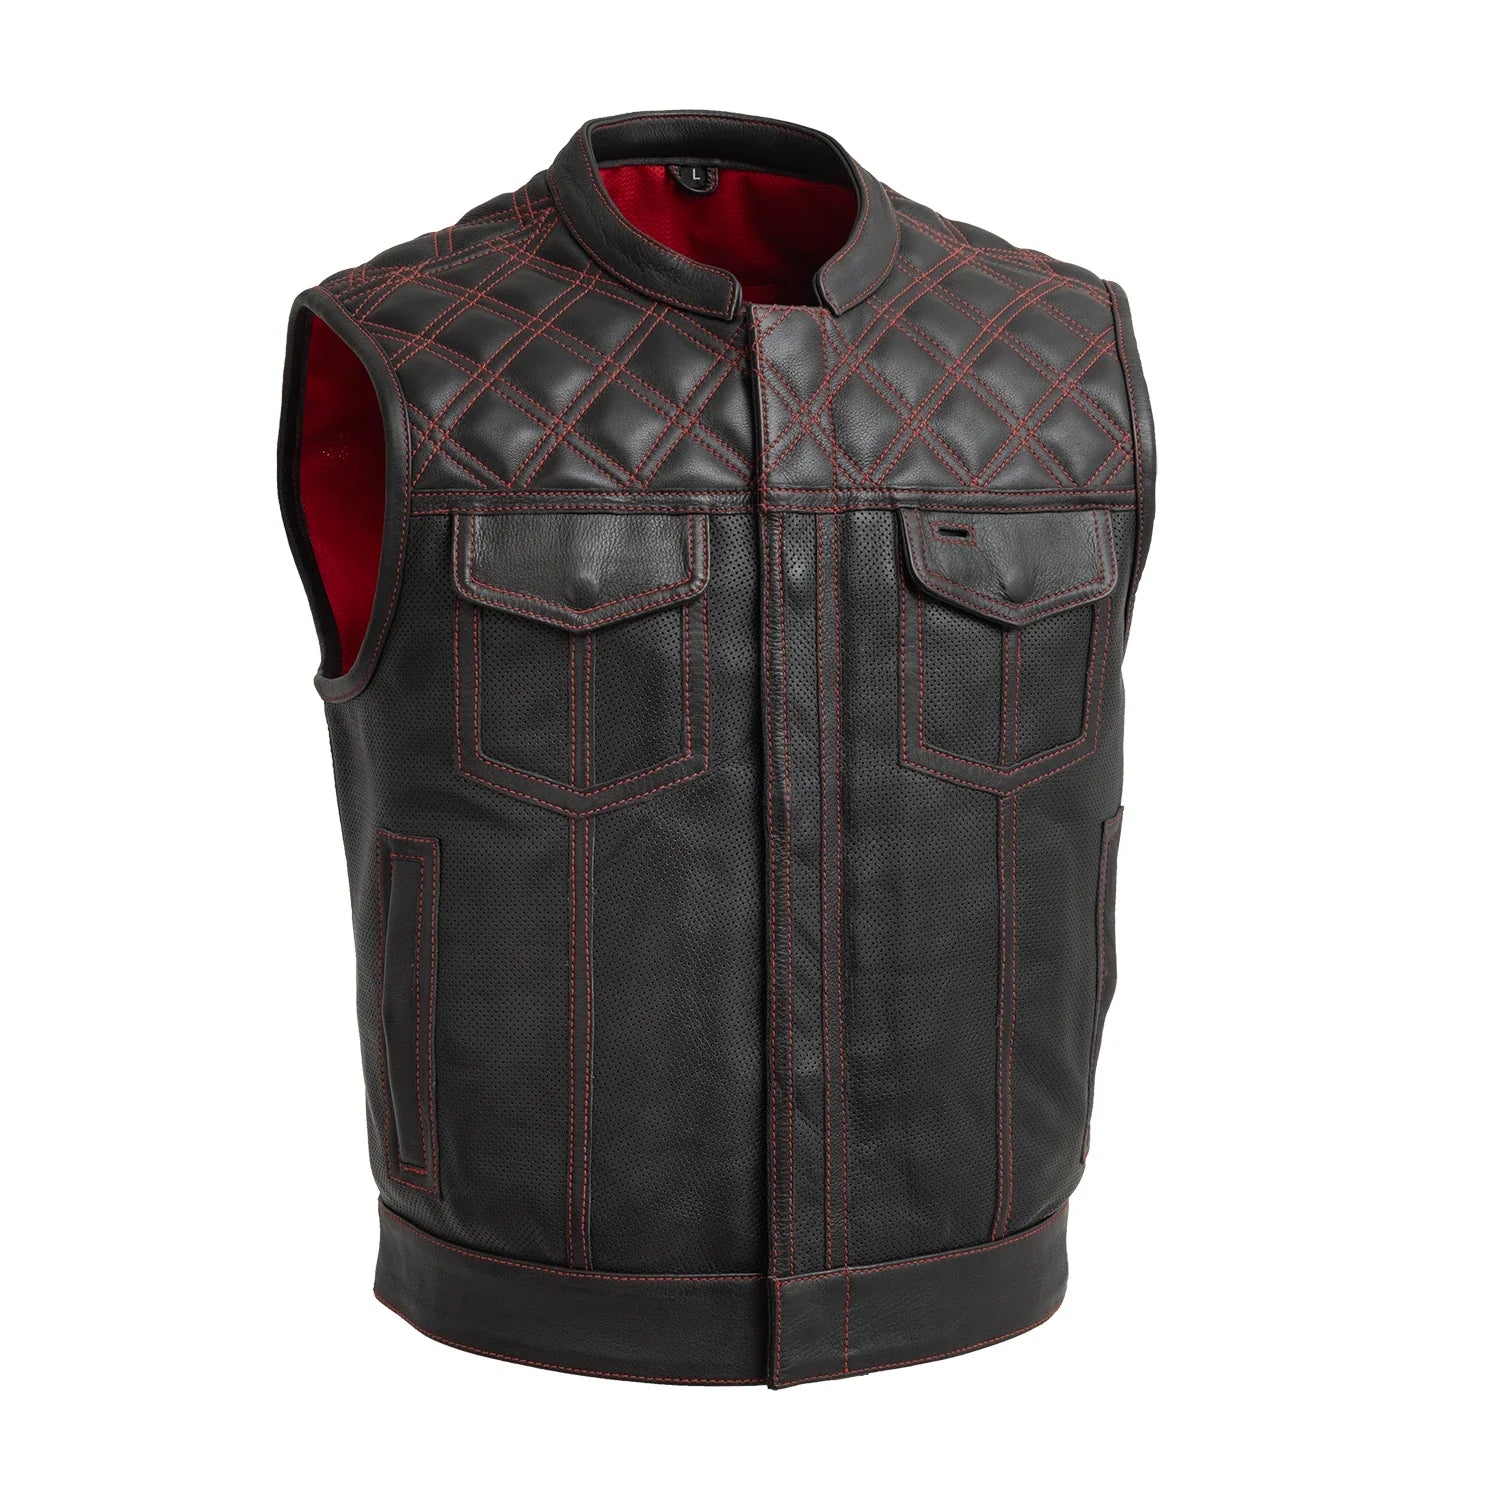 Upside Perforated Men's Club Style Leather Vest Men's Leather Vest First Manufacturing Company Red S 